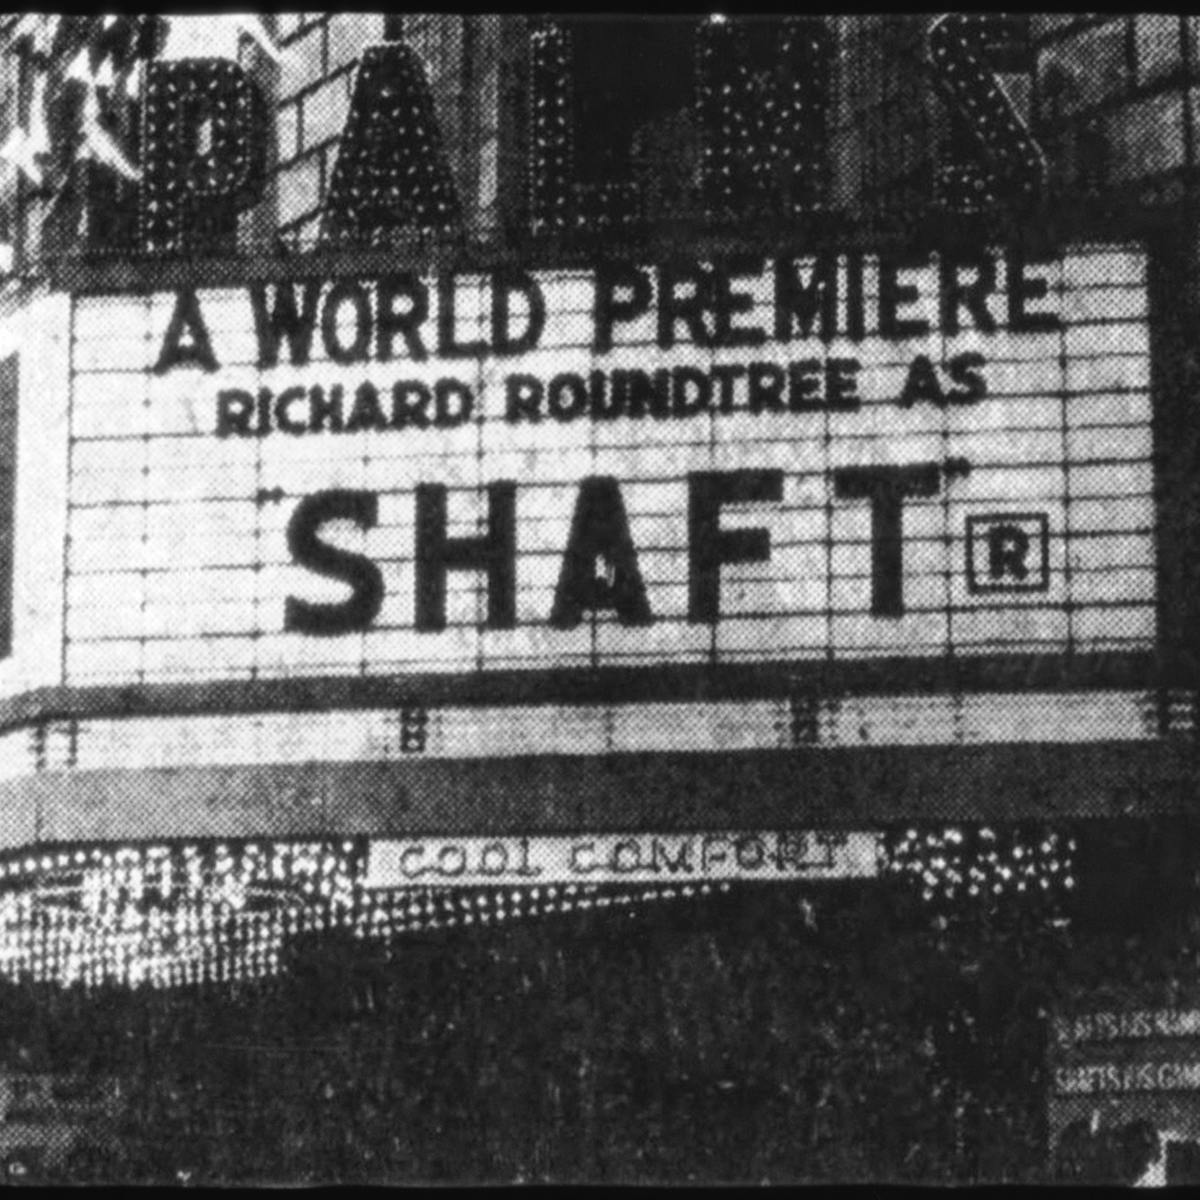 The movie theater marquee with Shaft.